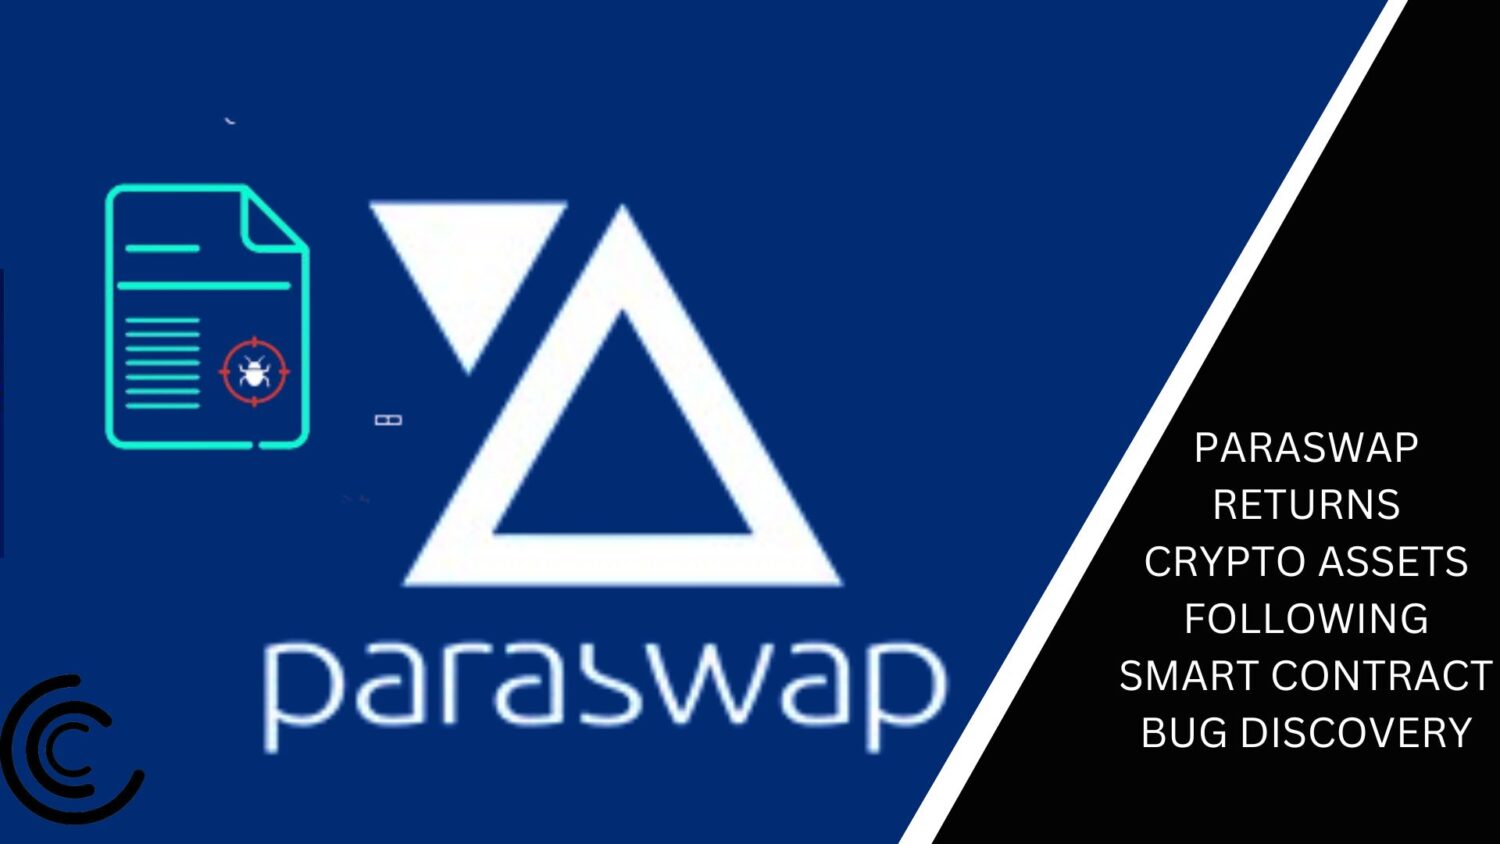 Paraswap Returns Crypto Assets Following Smart Contract Bug Discovery